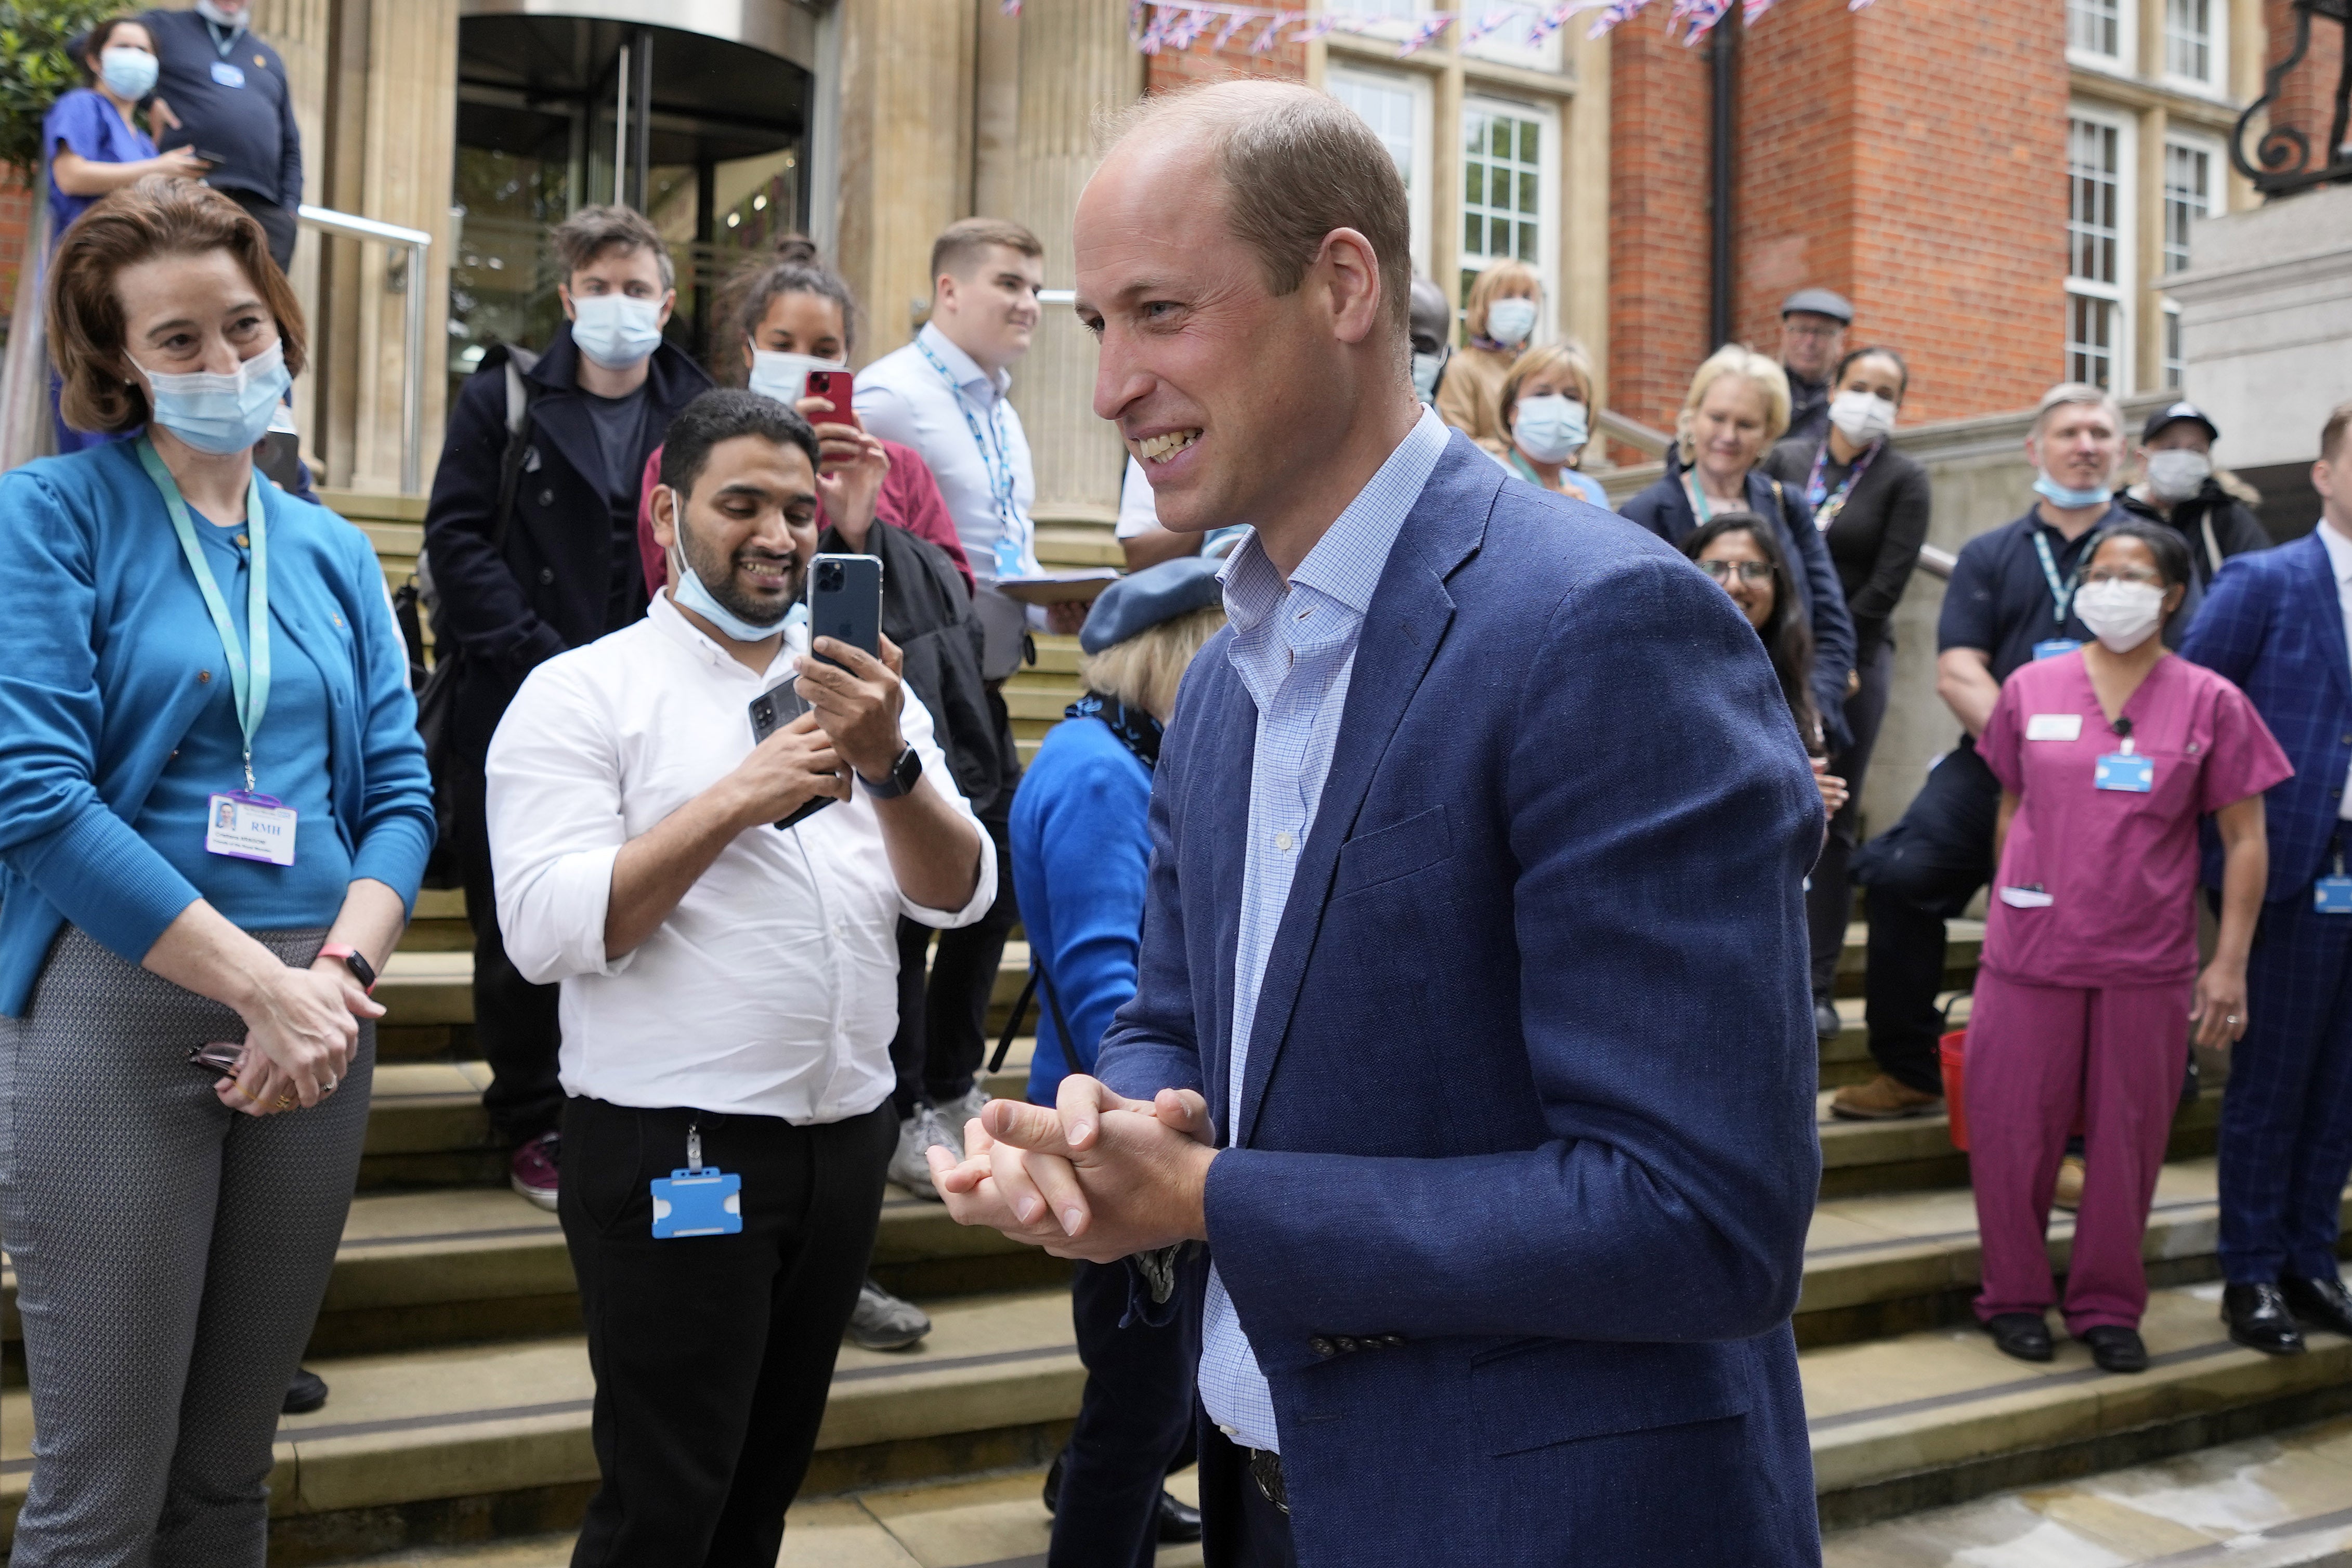 The Duke of Cambridge leaves after his visit to the Royal Marsden Hospital, London, to learn about some of the innovative work that The Royal Marsden is currently carrying out to improve cancer diagnosis and treatment. Picture date: Tuesday May 24, 2022.